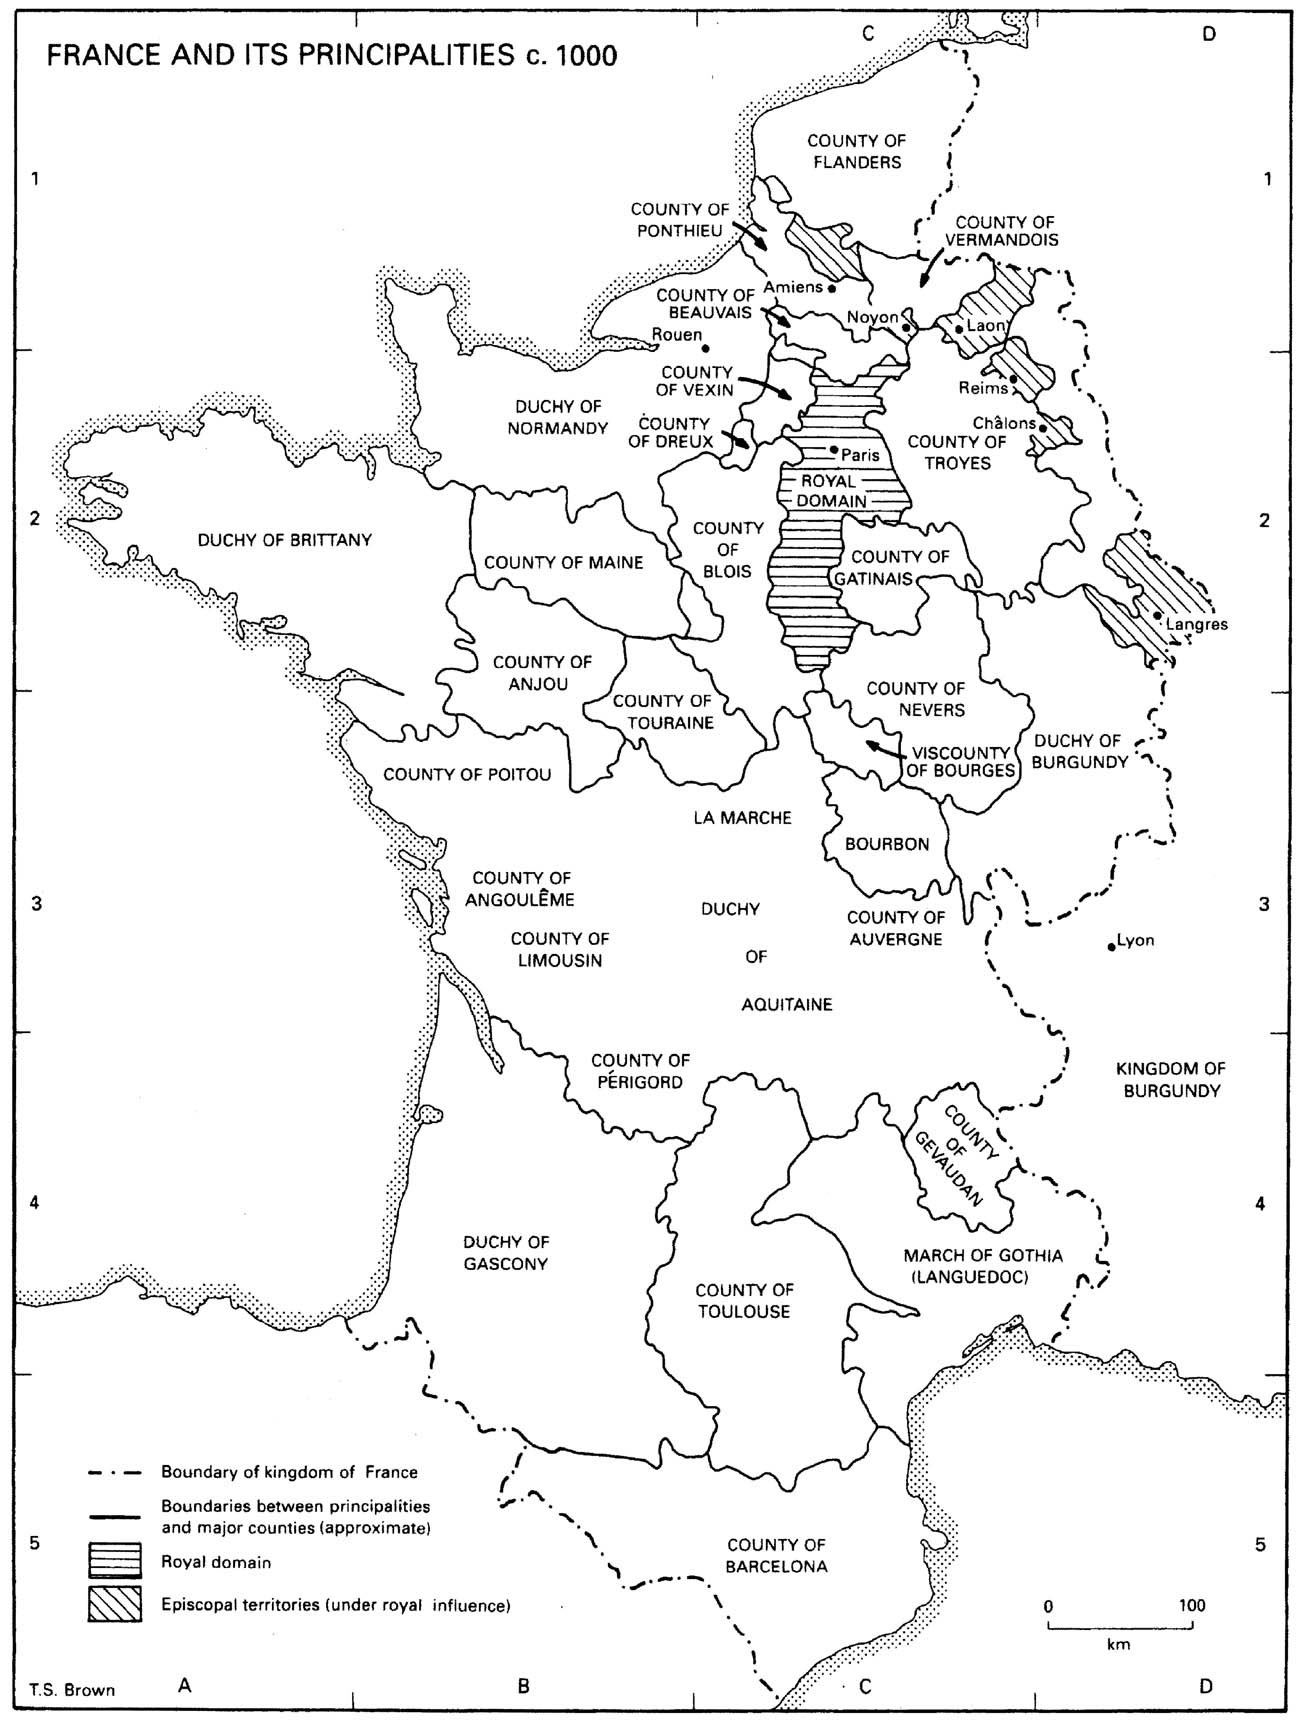 12. France and its principalities c.1000